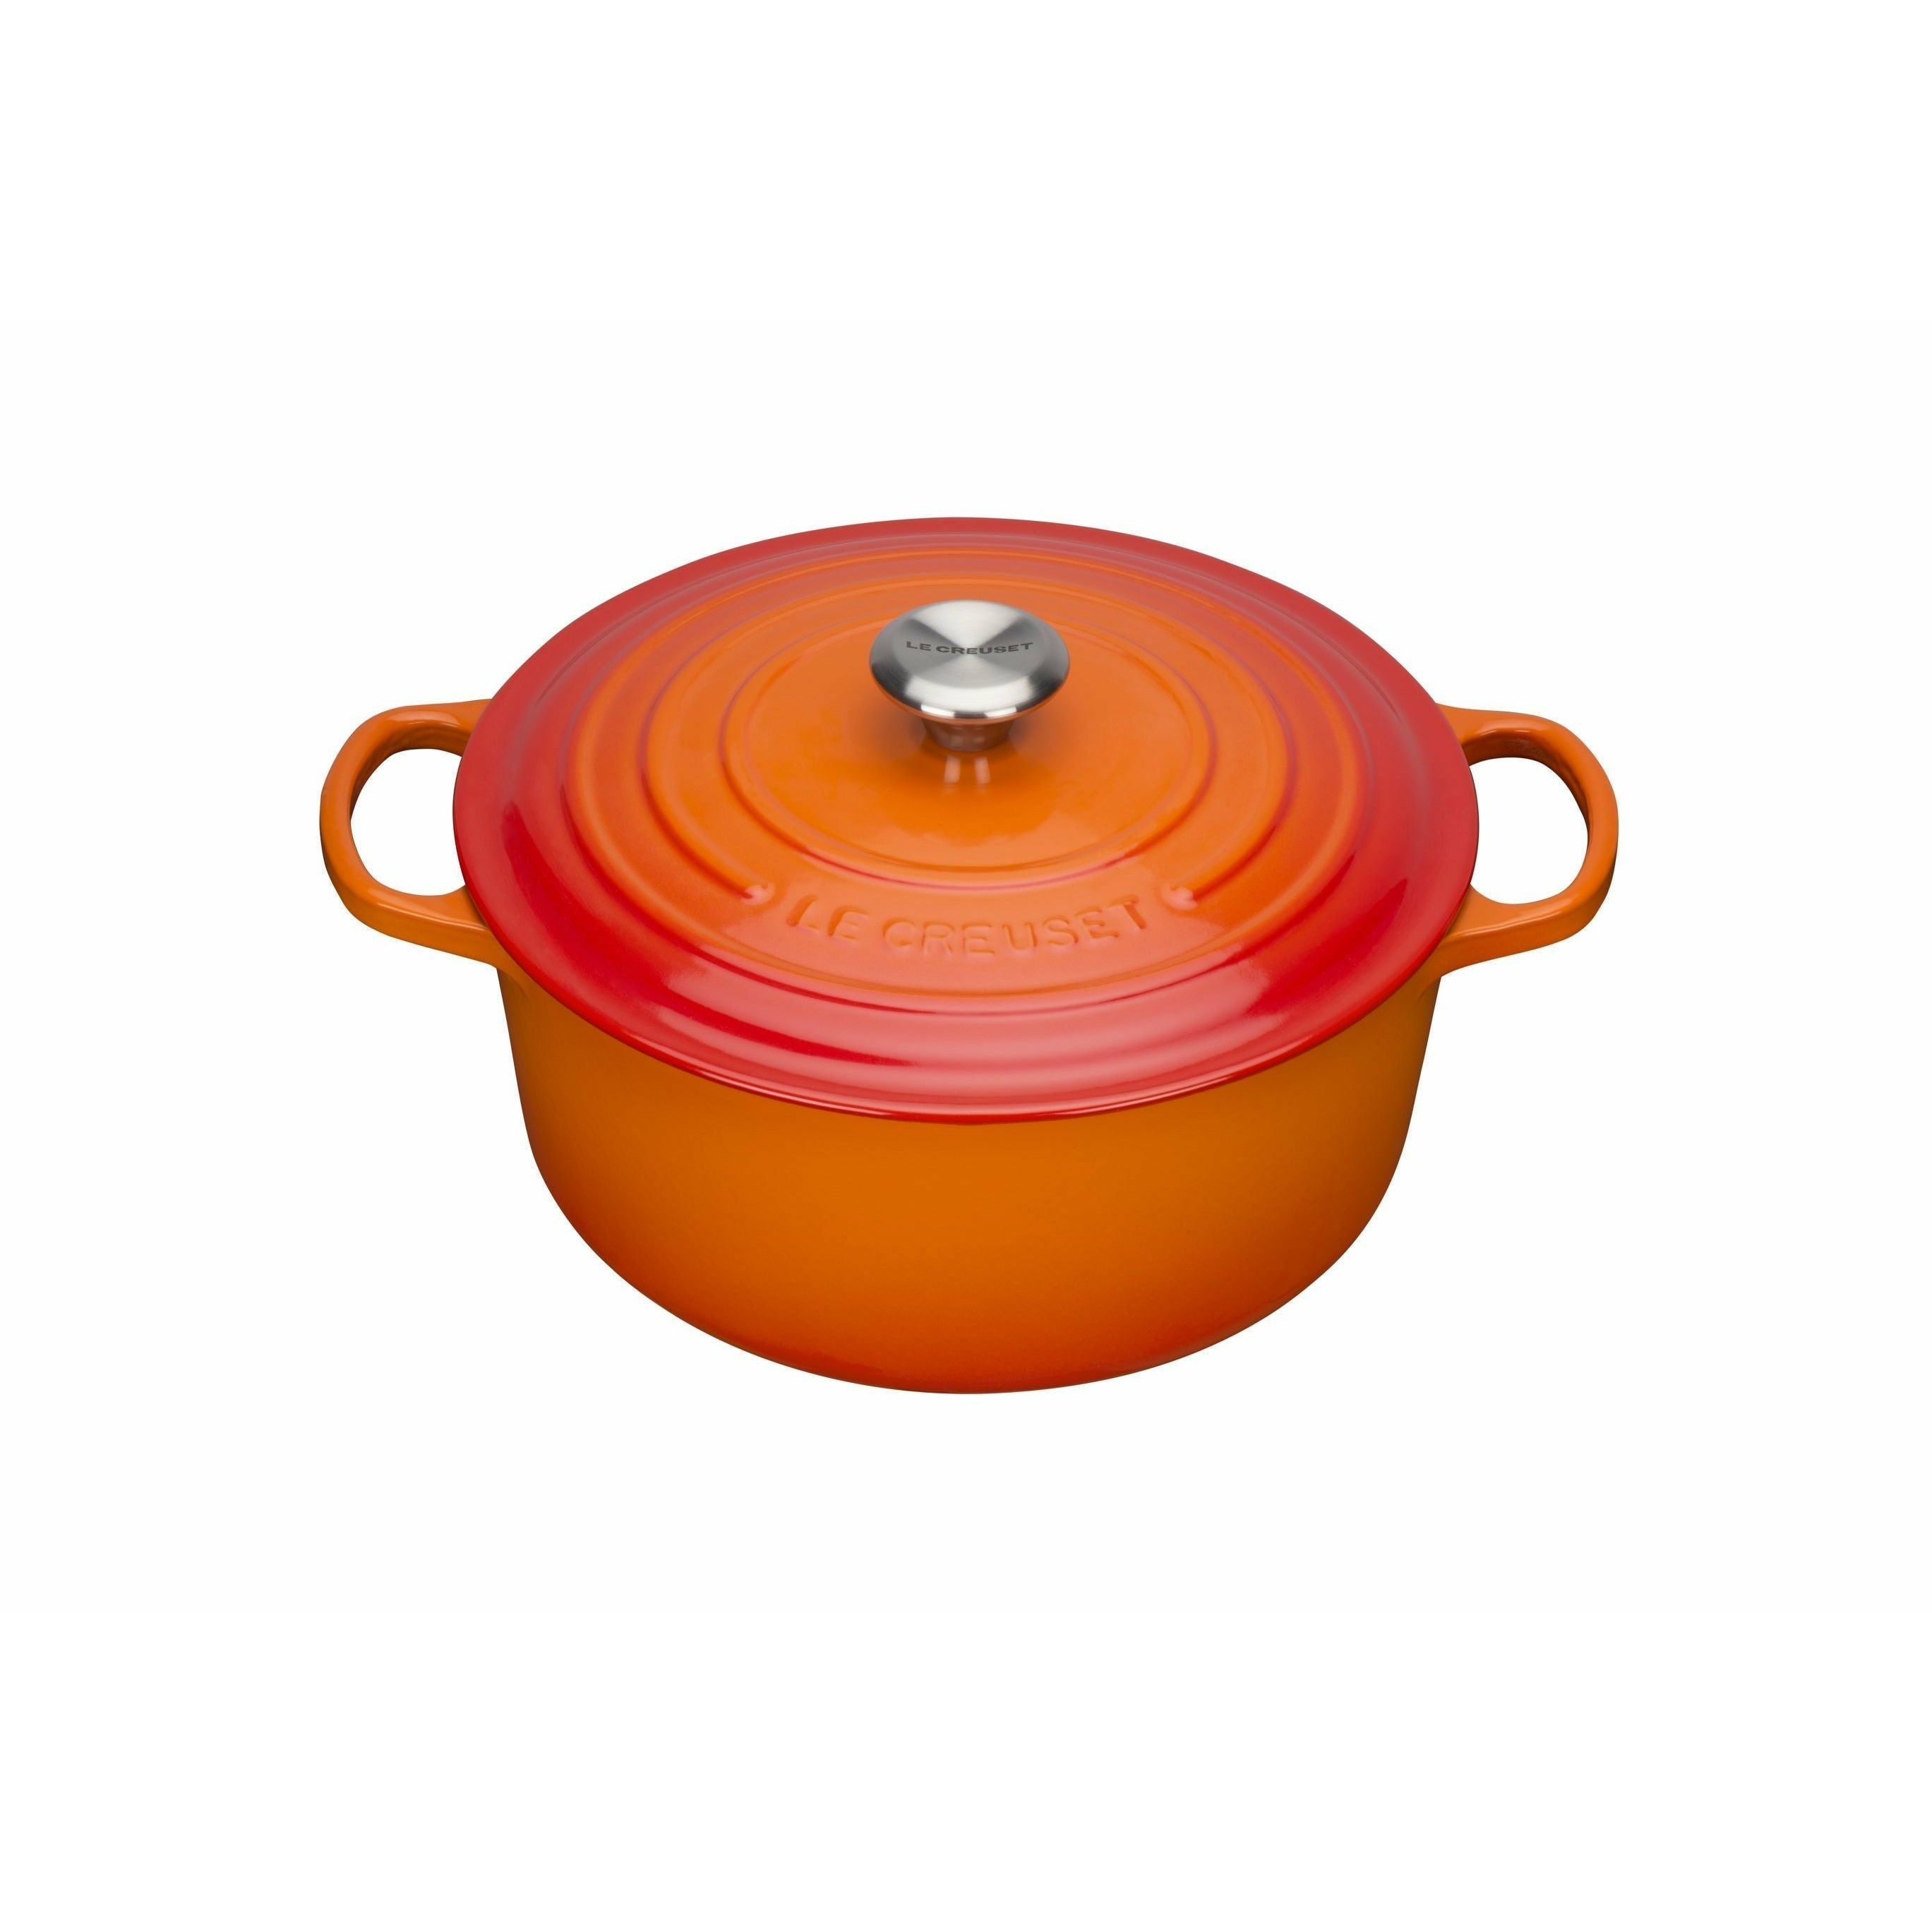 Le Creuset Signature Round Roaster 18 cm, oven rood